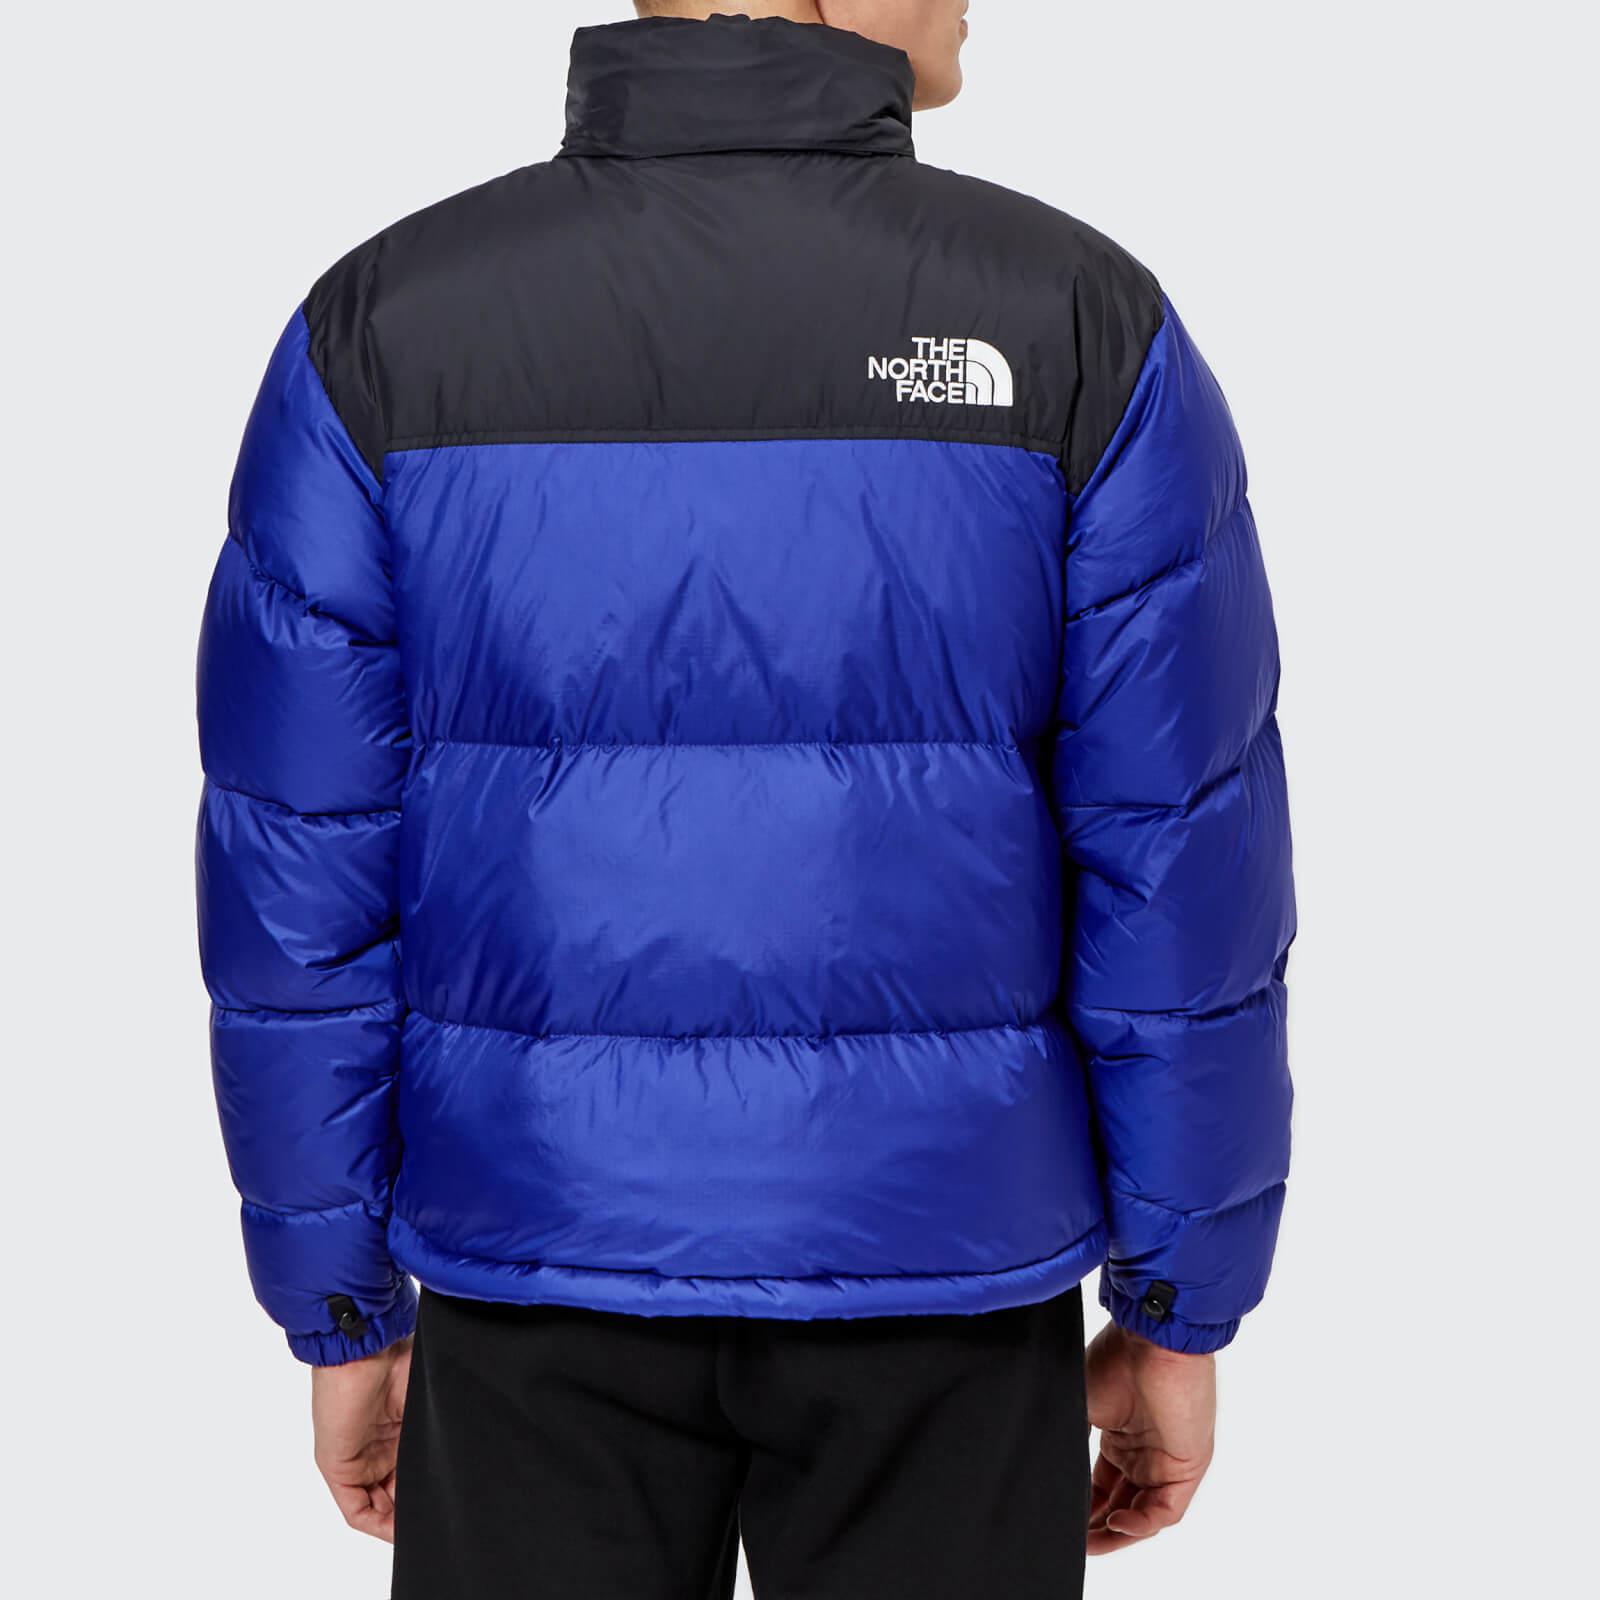 The North Face Blue Puffer | rededuct.com